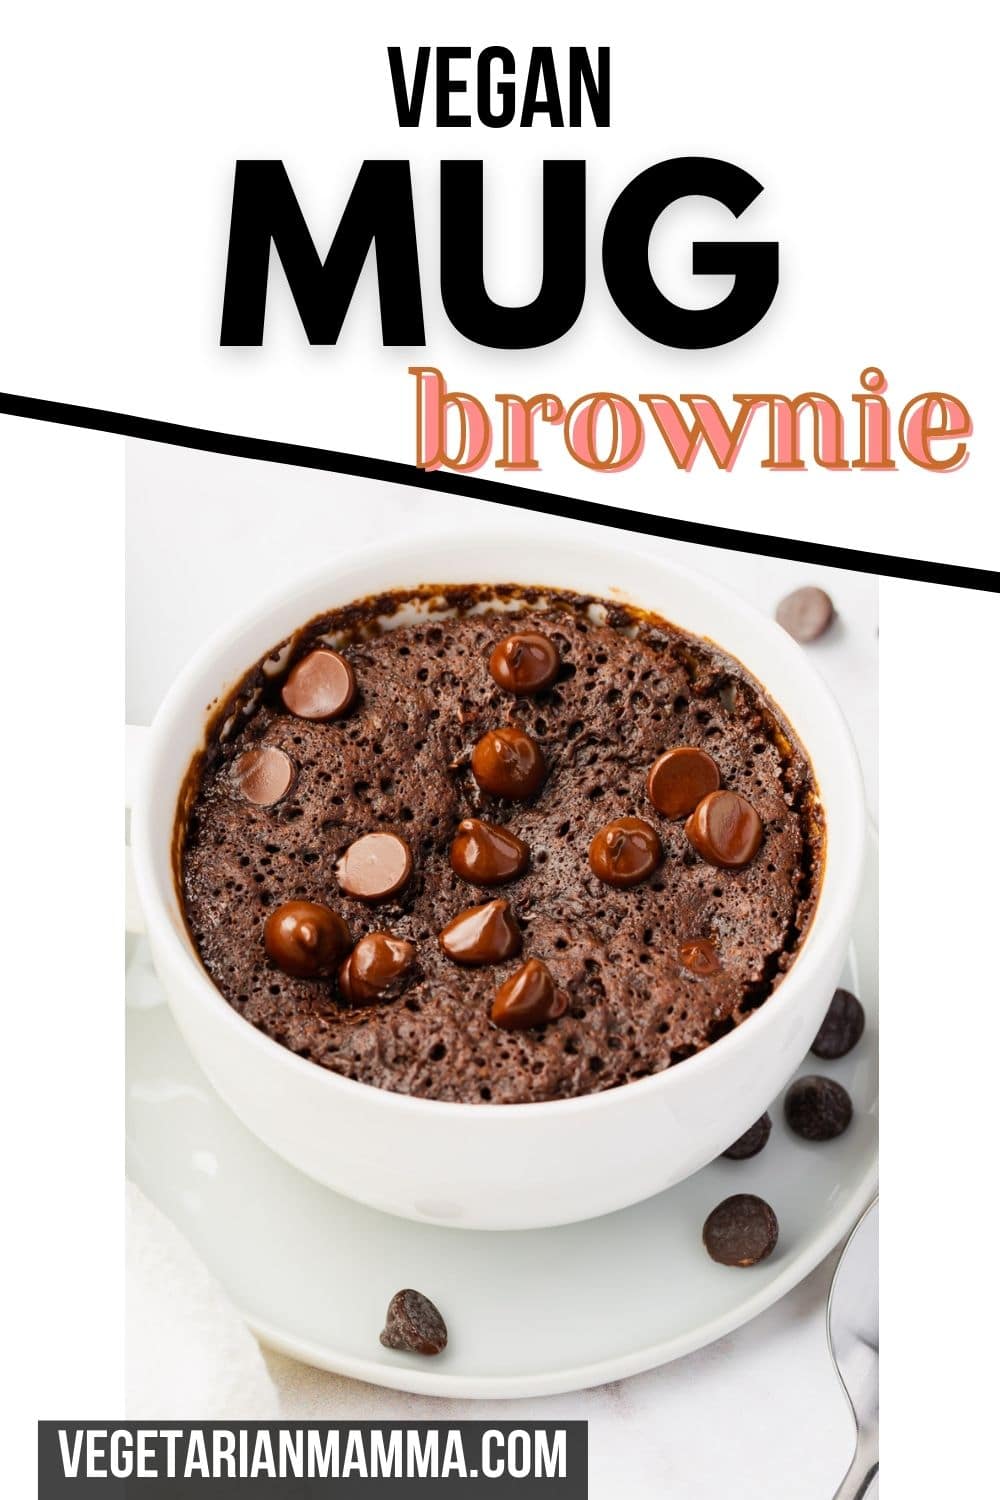 This 5 minute, Vegan Mug Brownie is the easiest and quickest single serve chocolate dessert out there! When the late night cravings hit, try this delicious vegan mug brownie! Oh and it is gluten free as well! | vegan chocolate cake | vegan mug cake | gluten free mug cake